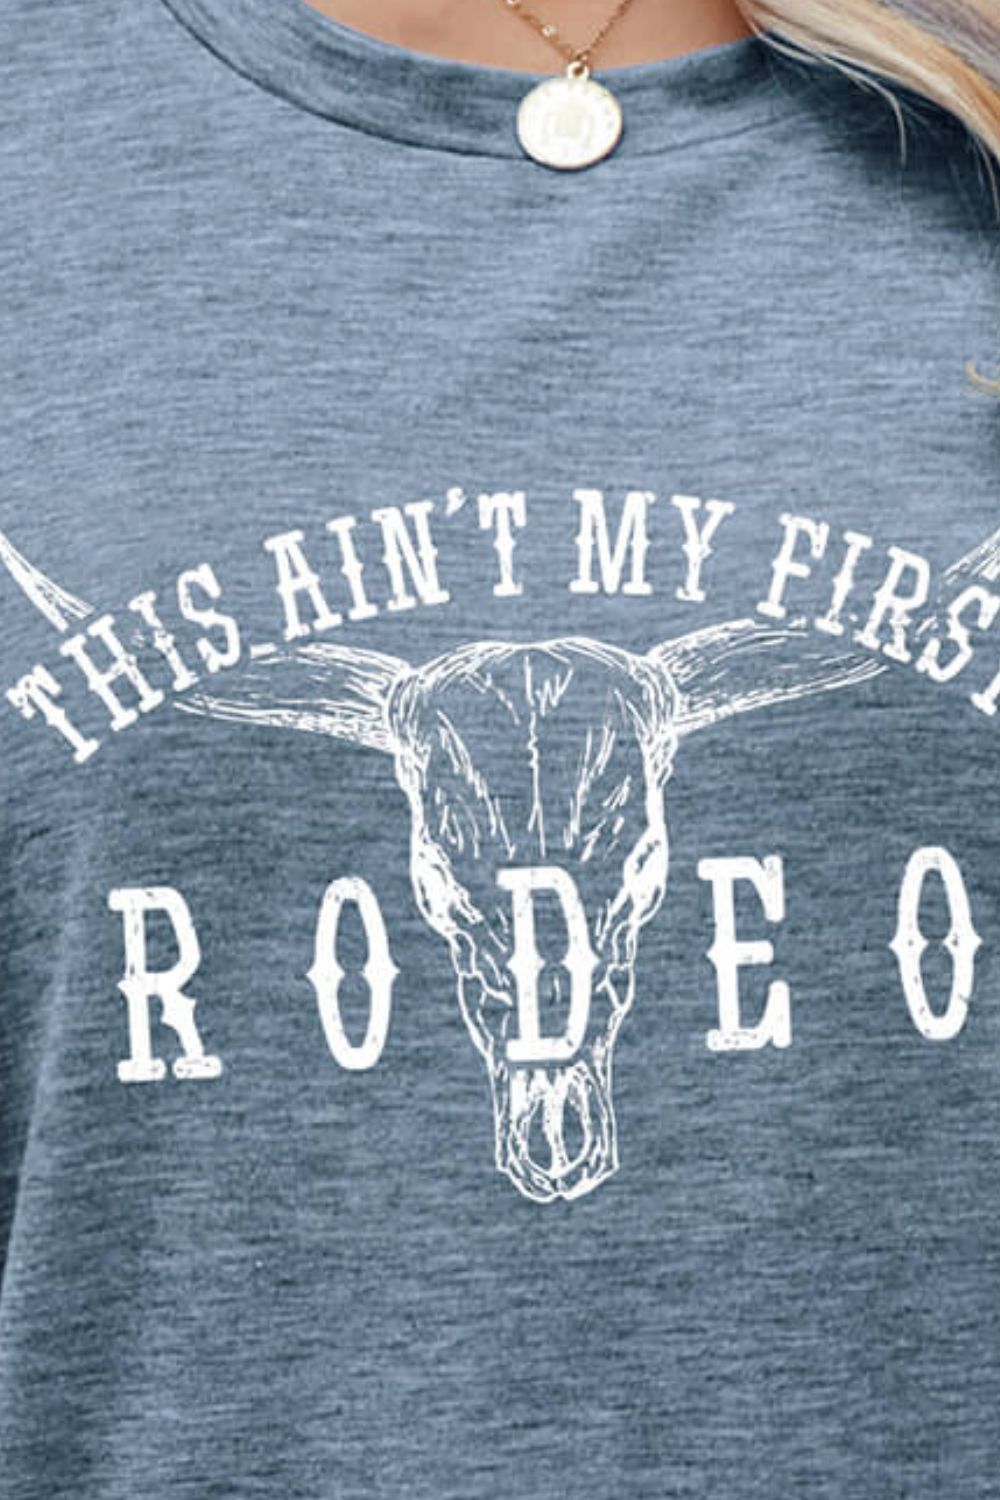 THIS AIN'T MY FIRST RODEO Tee Shirt Branding Iron Western Wear